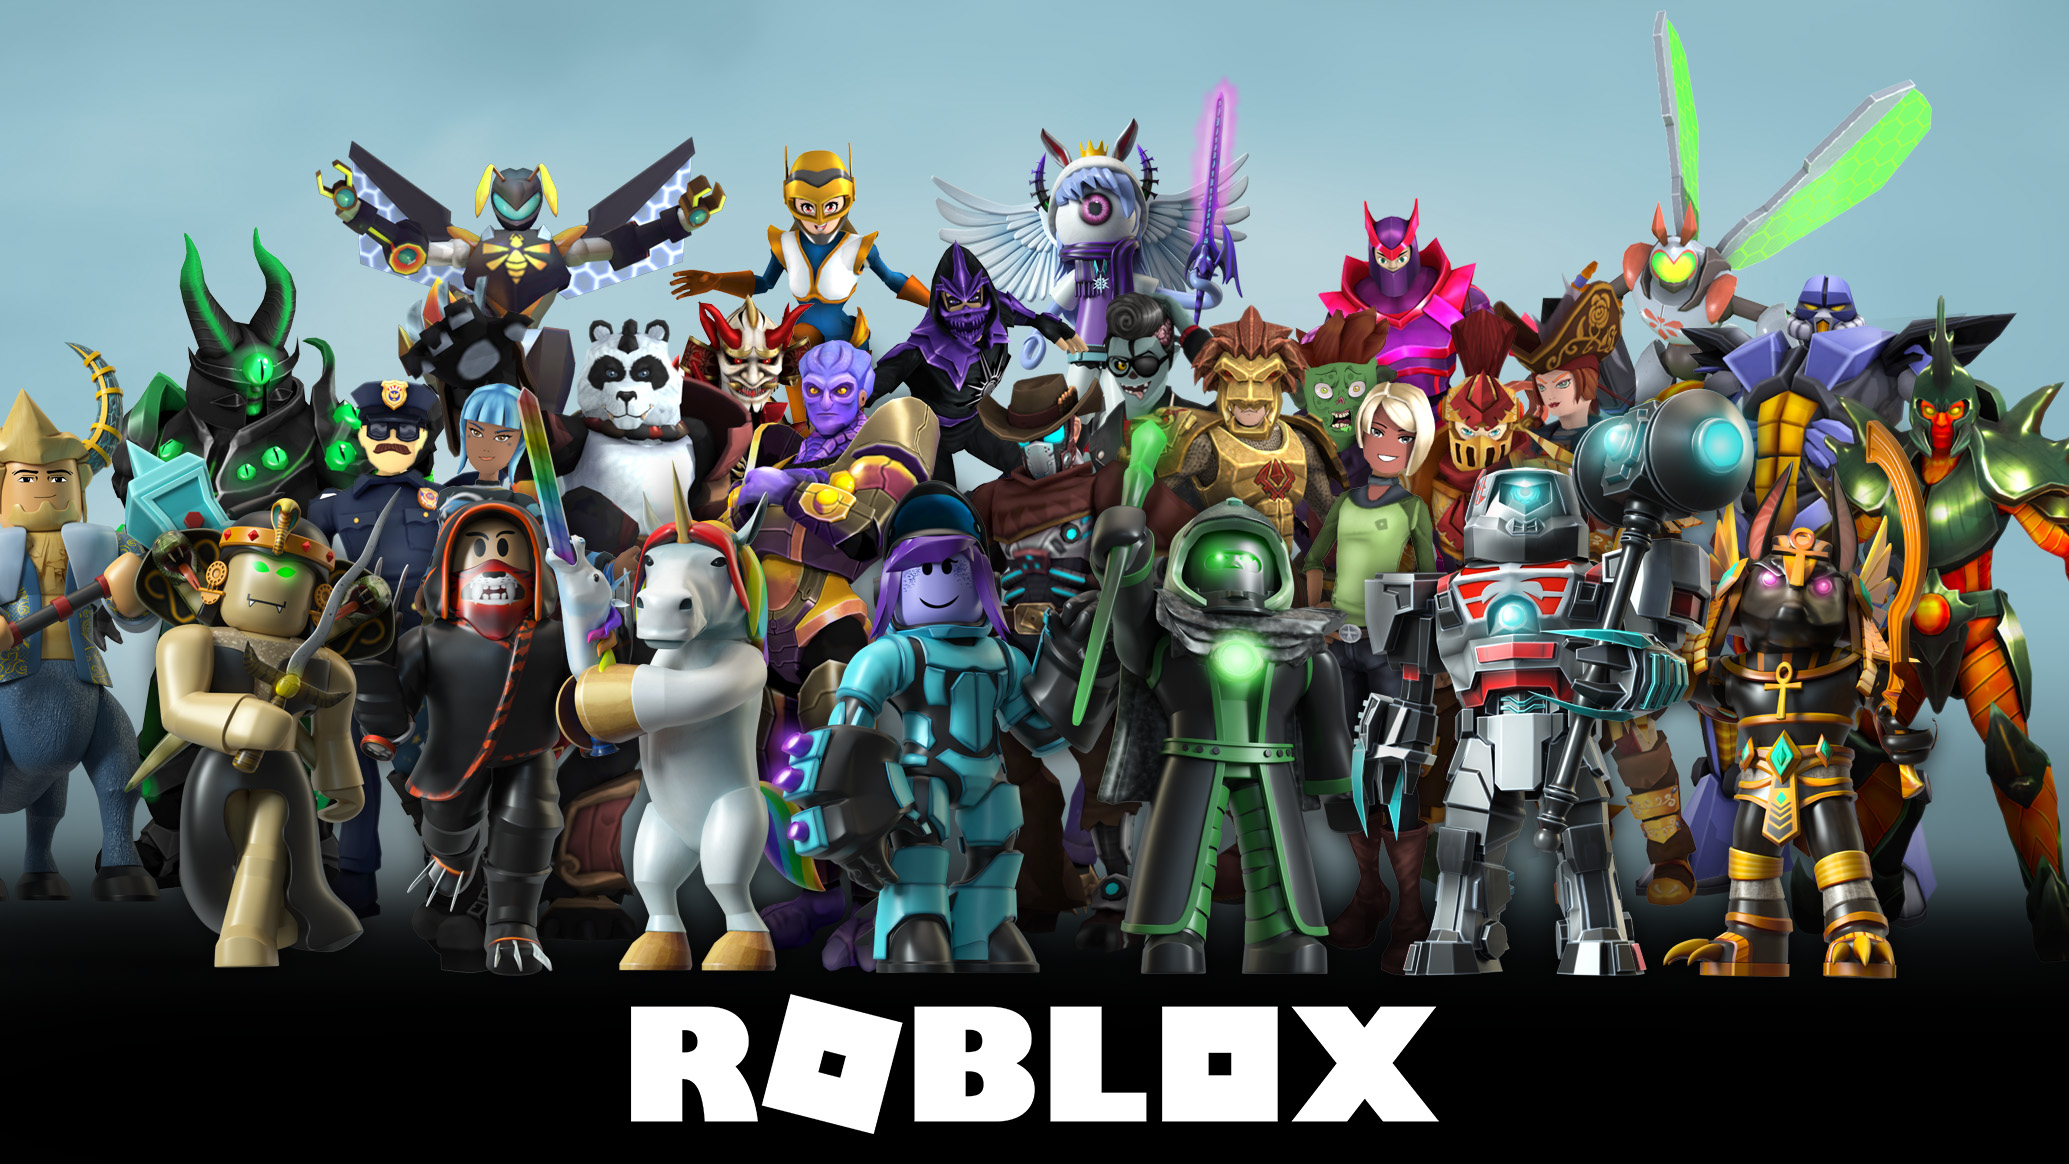 Roblox featured